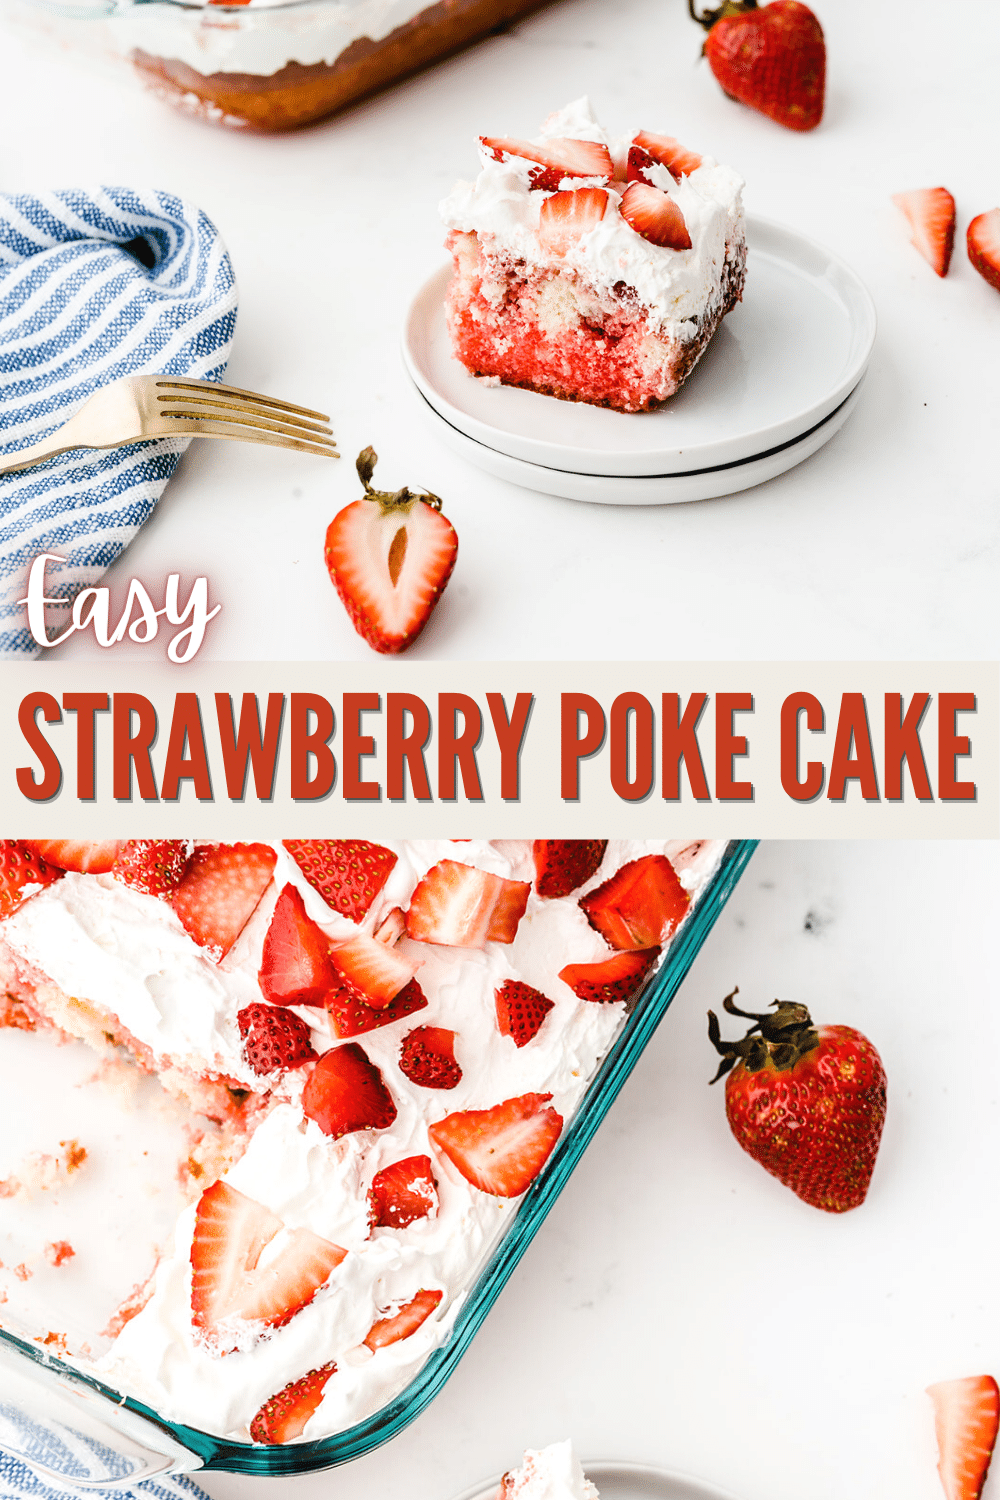 Strawberry poke cake is a perfect dessert for gatherings with family or friends. They will love you even more once they get a bite #cake #dessert #recipe #strawberrypokecake #pokecake via @wondermomwannab